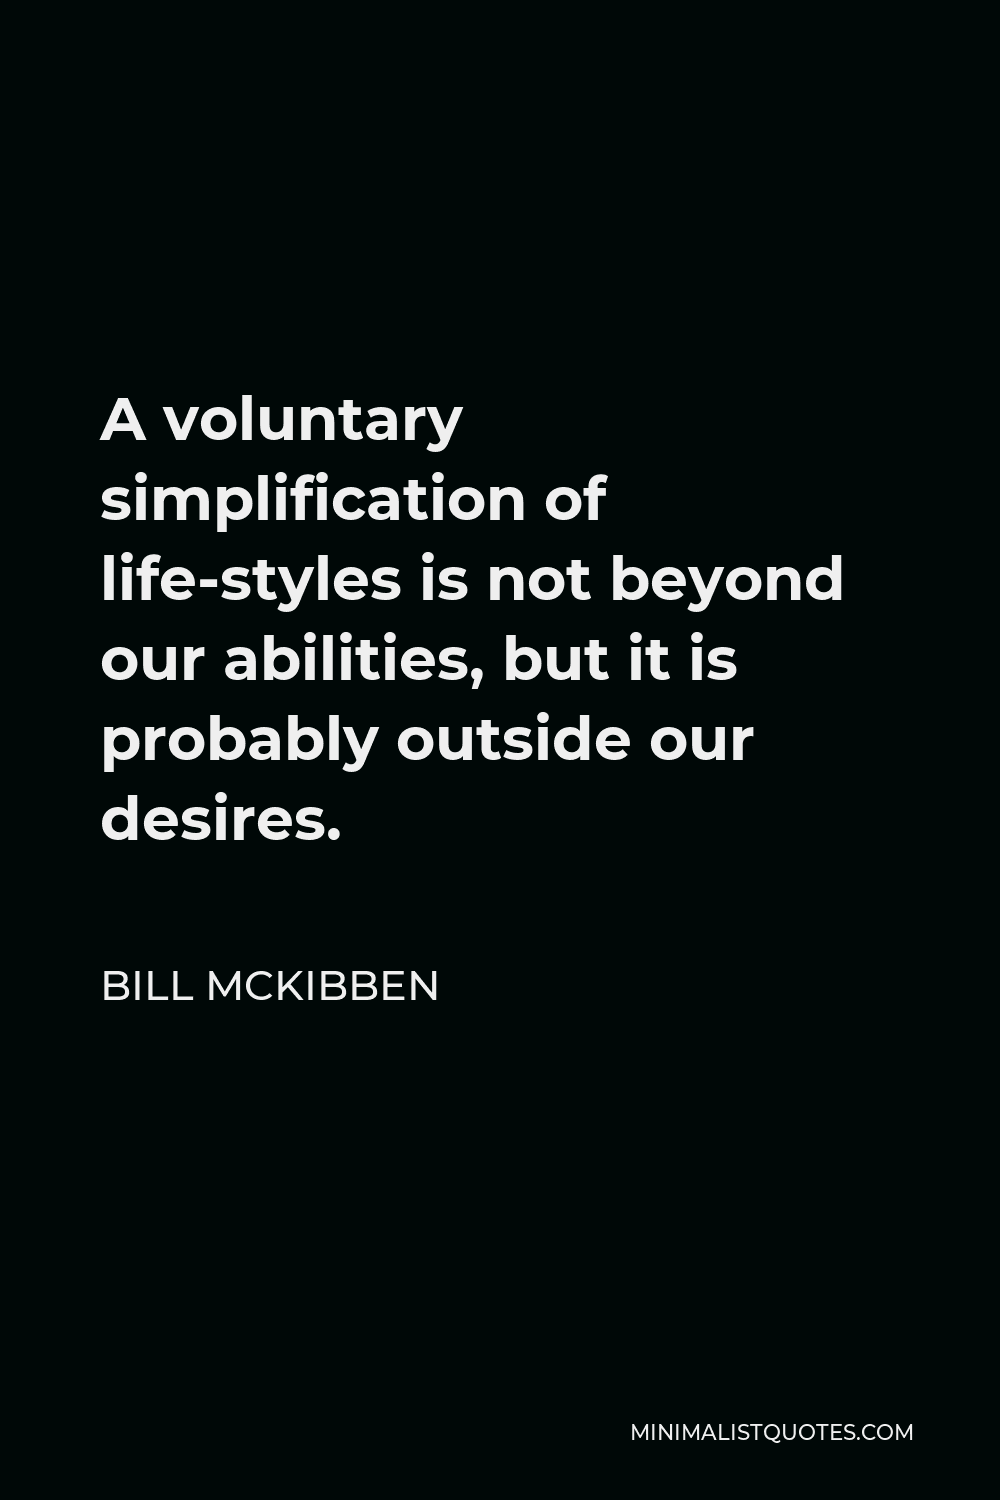 Bill McKibben Quote - A voluntary simplification of life-styles is not beyond our abilities, but it is probably outside our desires.